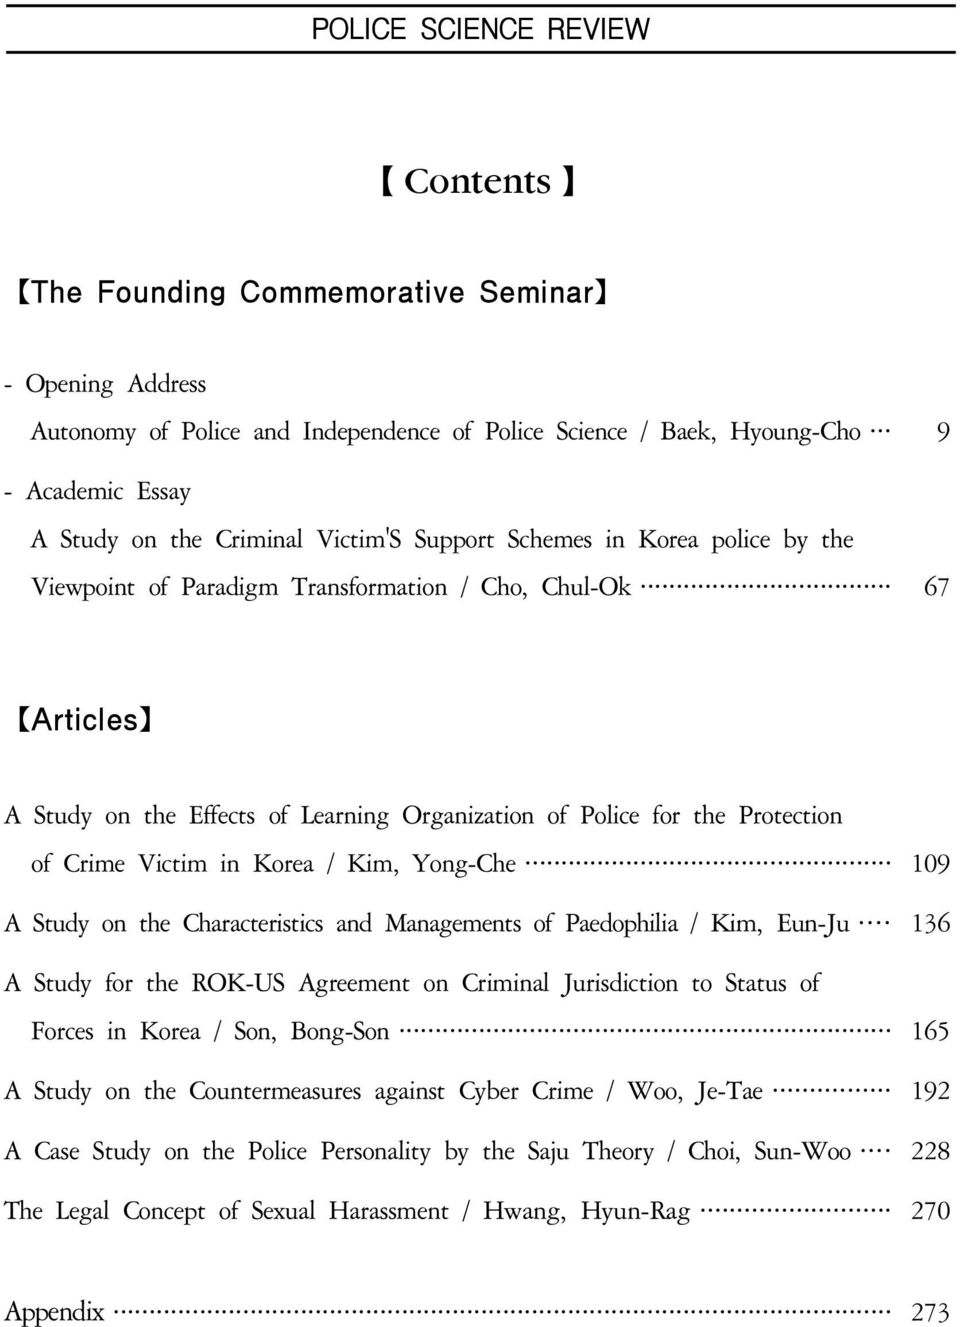 Victim in Korea / Kim, Yong-Che 109 A Study on the Characteristics and Managements of Paedophilia / Kim, Eun-Ju 136 A Study for the ROK-US Agreement on Criminal Jurisdiction to Status of Forces in